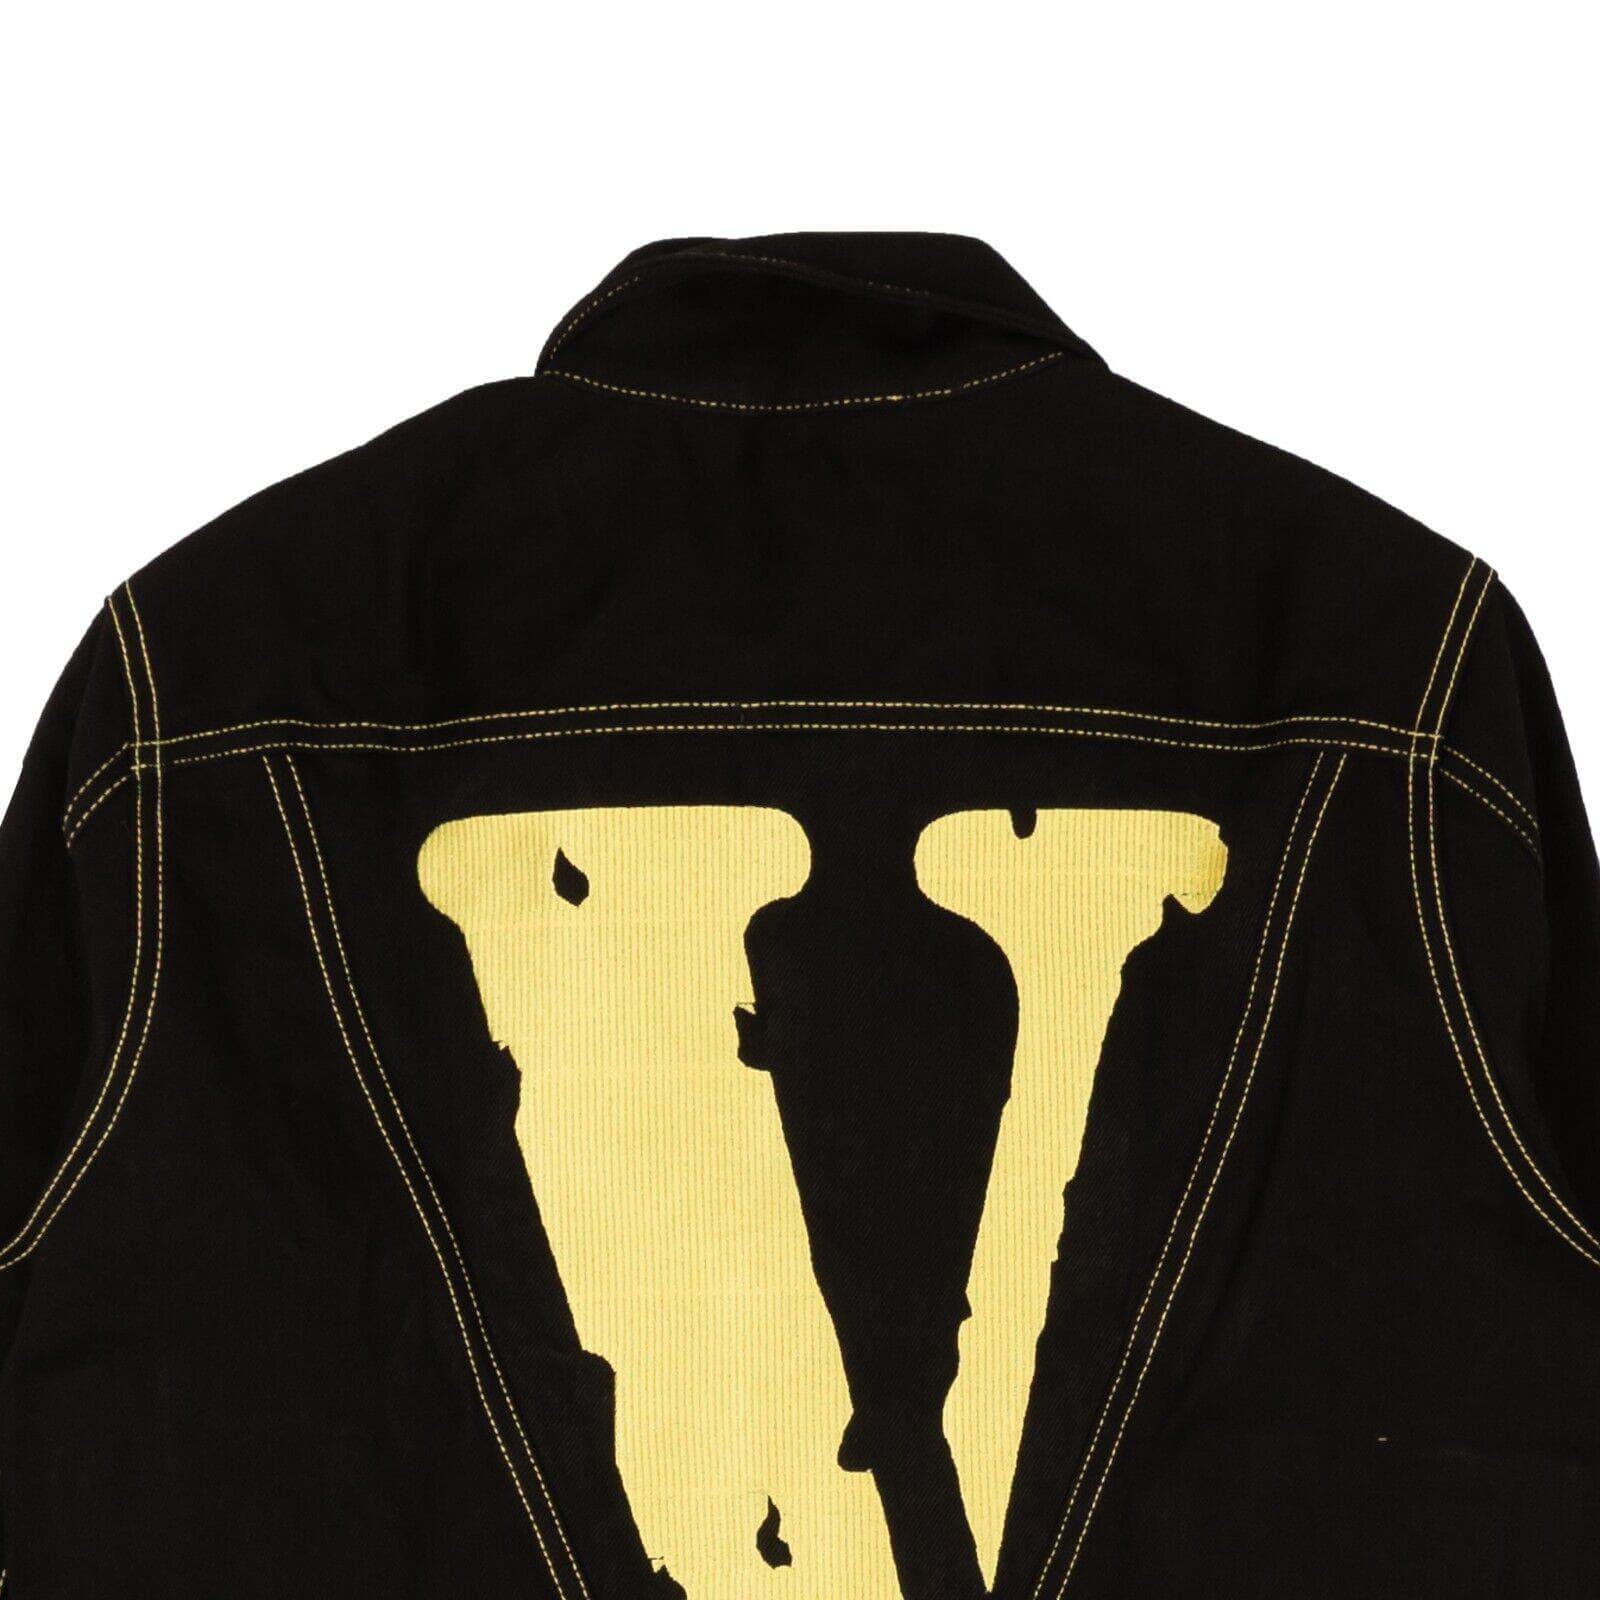 Vlone 750-1000, channelenable-all, chicmi, couponcollection, gender-mens, main-clothing, mens-denim-jackets, mens-shoes, size-l, size-m, size-xl, size-xxl, vlone Black And Yellow Friends Denim Jacket